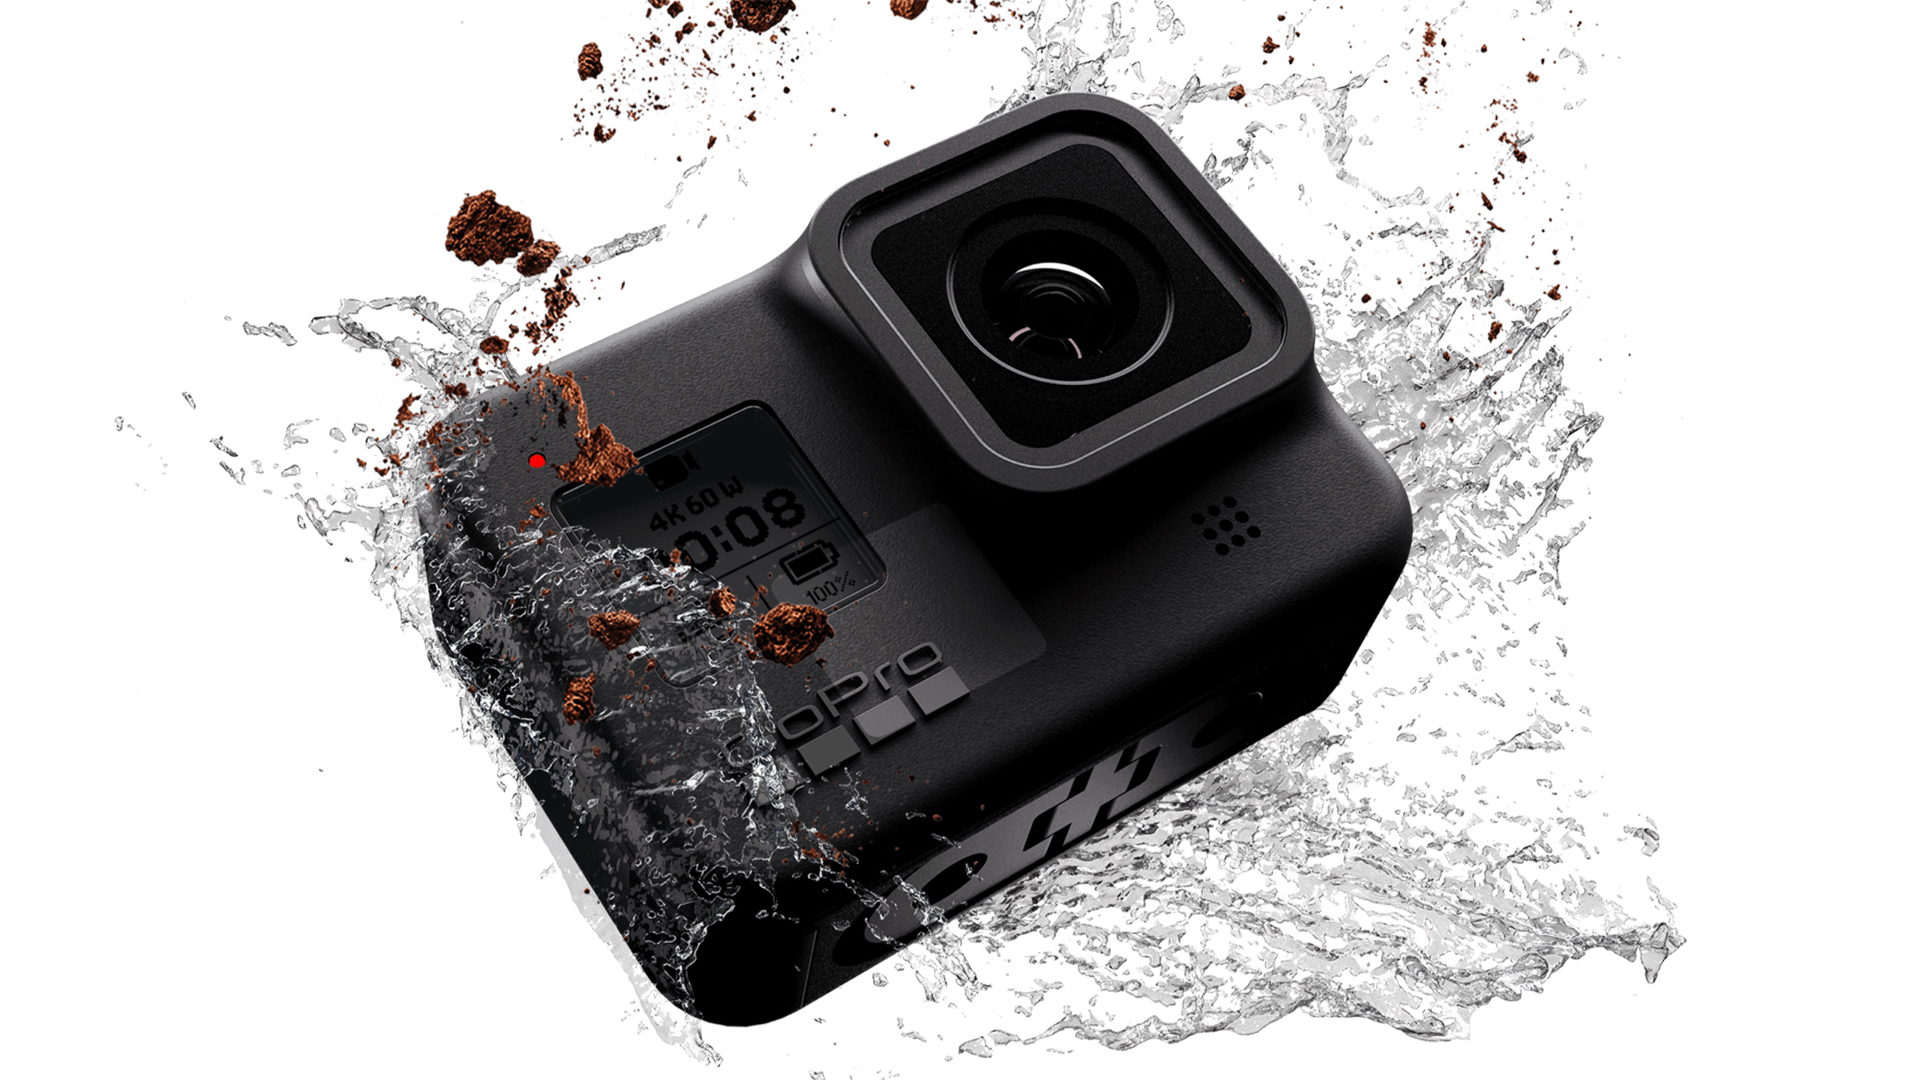 GoPro's Hero 8 and Max 360 cameras are here